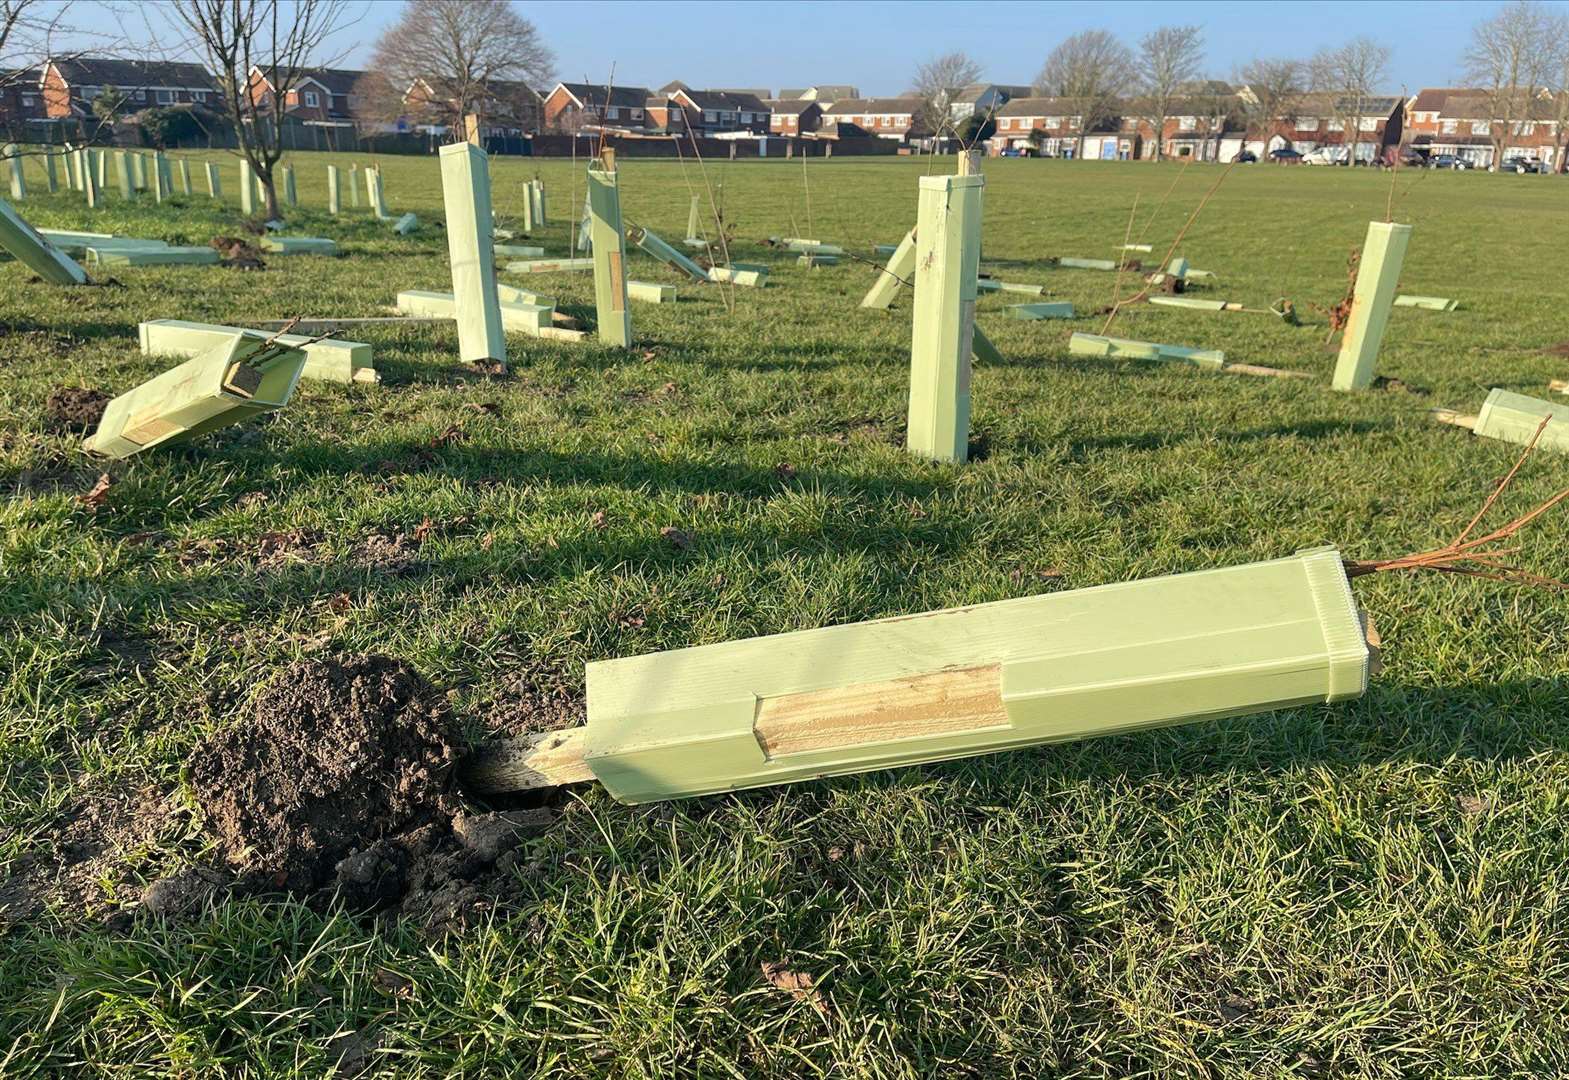 Around 60 trees were torn from the ground. Picture: Swale Borough Council